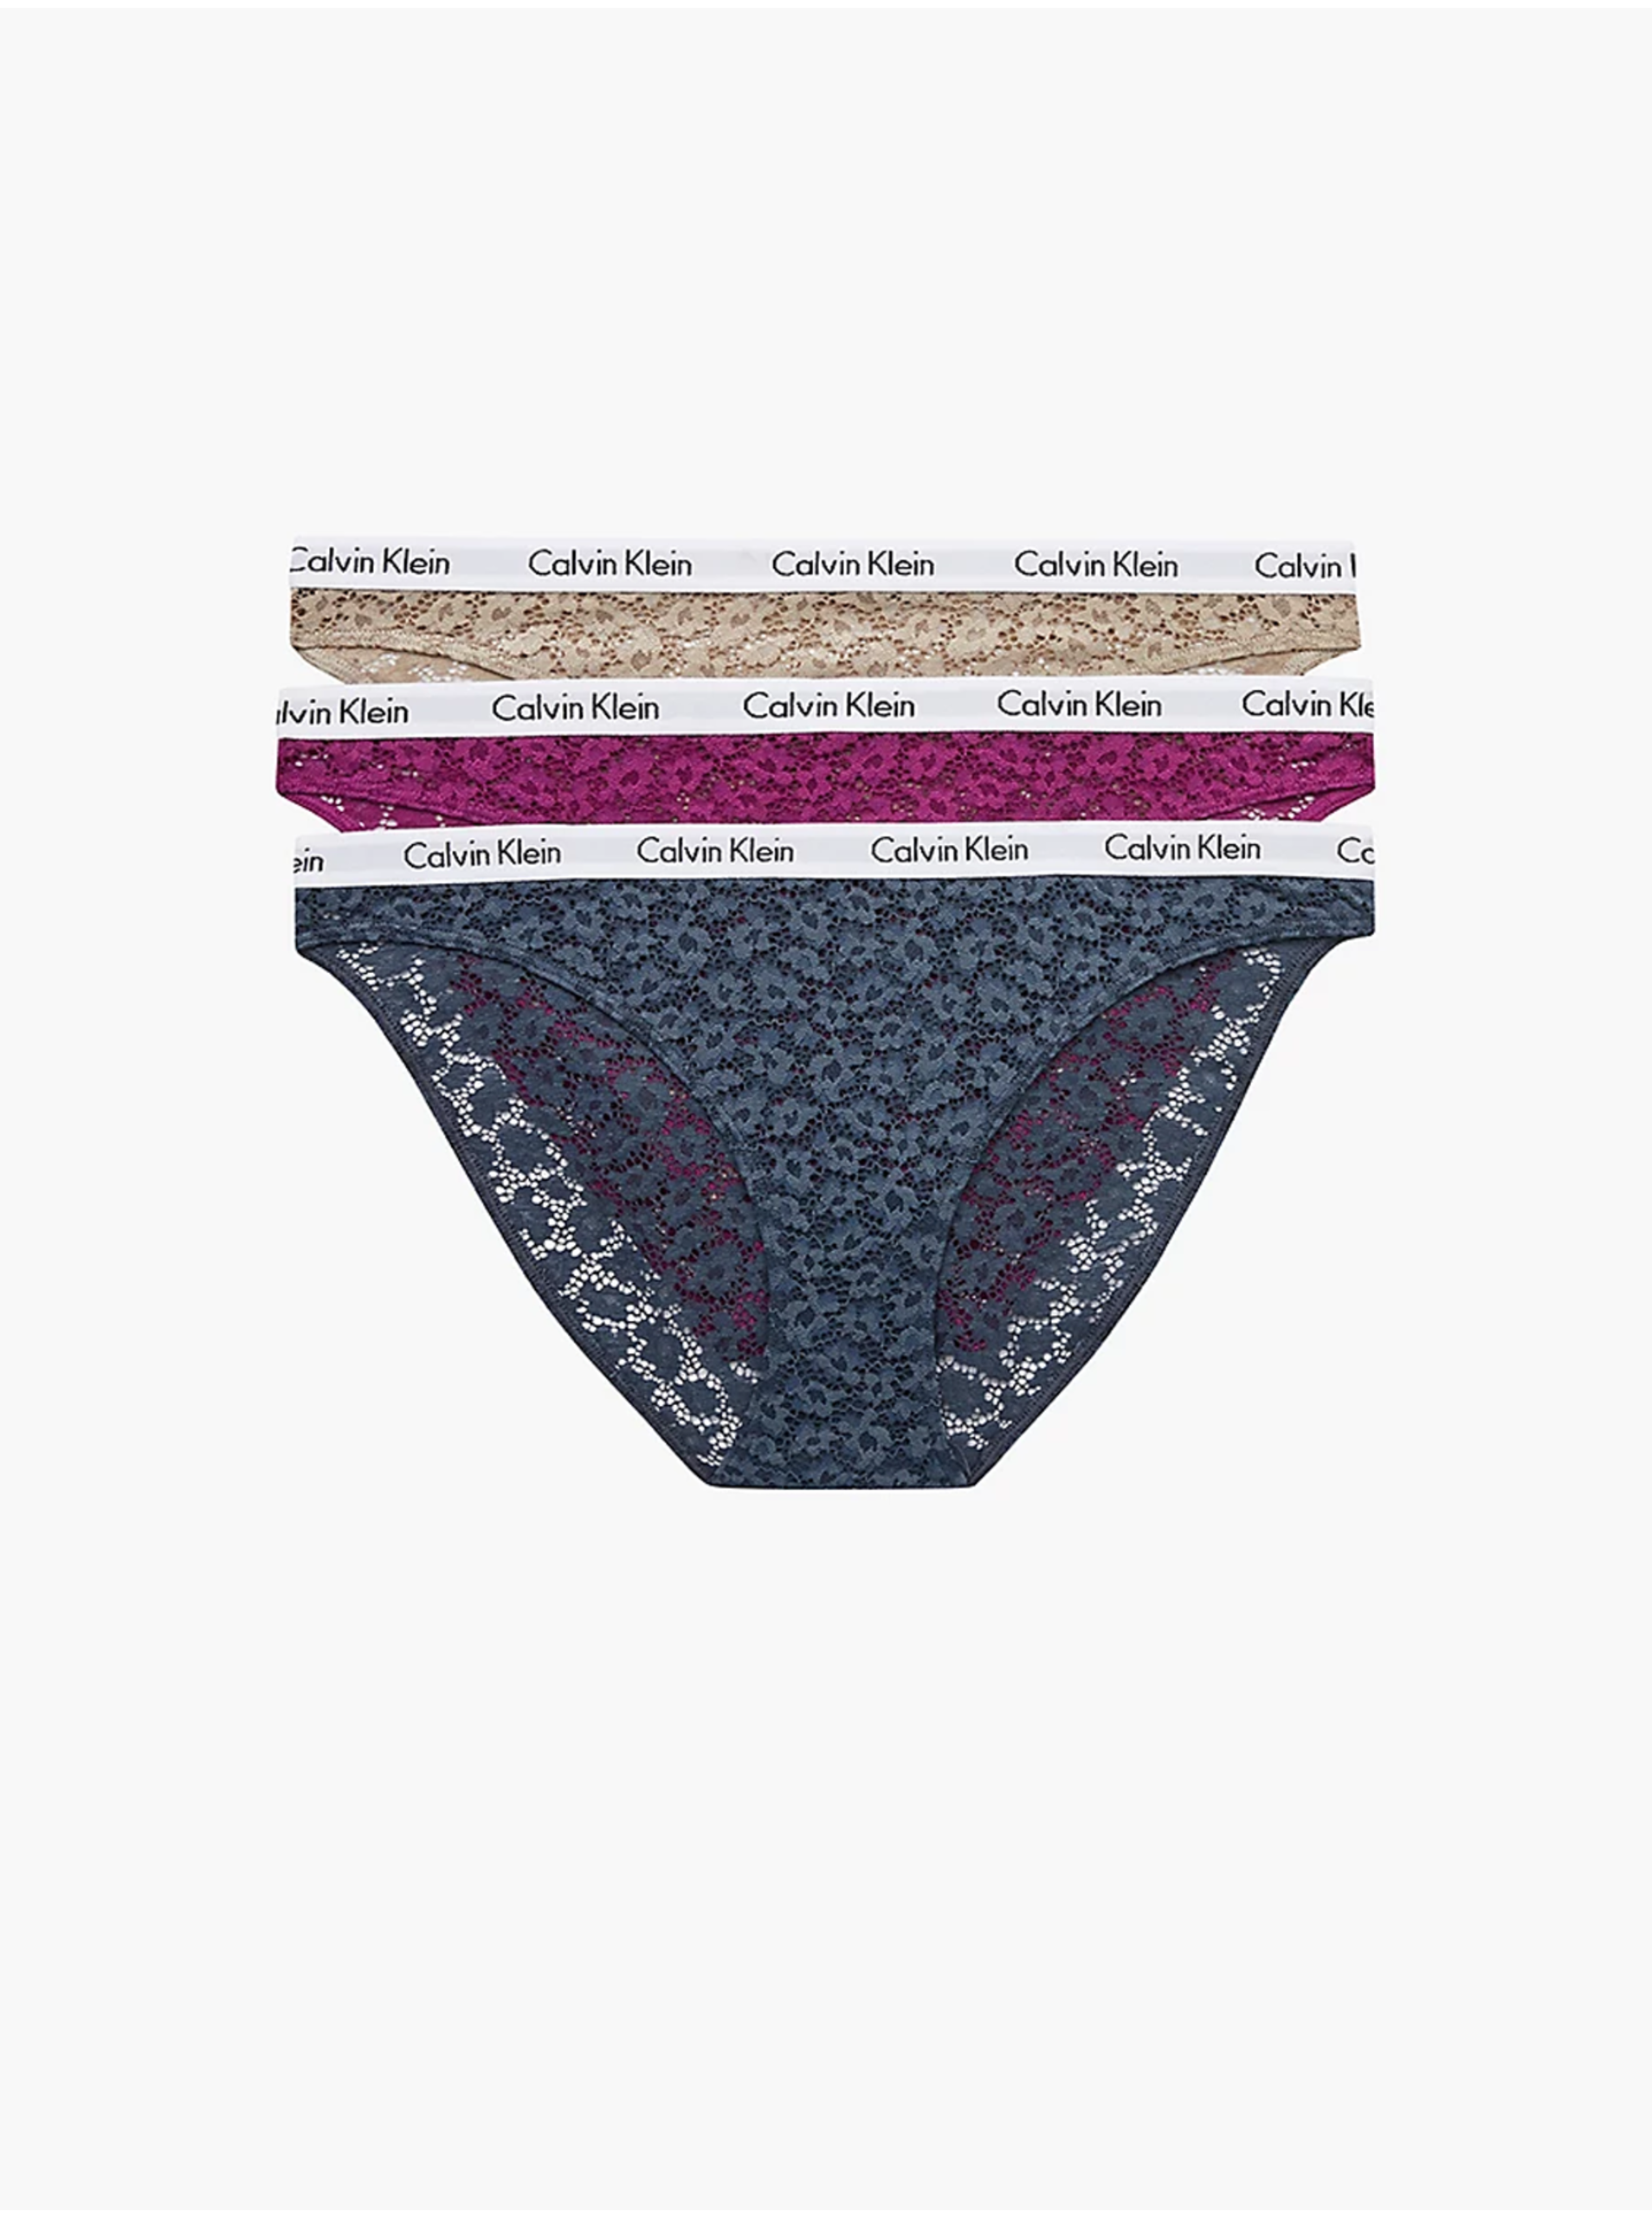 Cotton Thong Breathable Panties Low Rise Underwear – Jack&Joan's